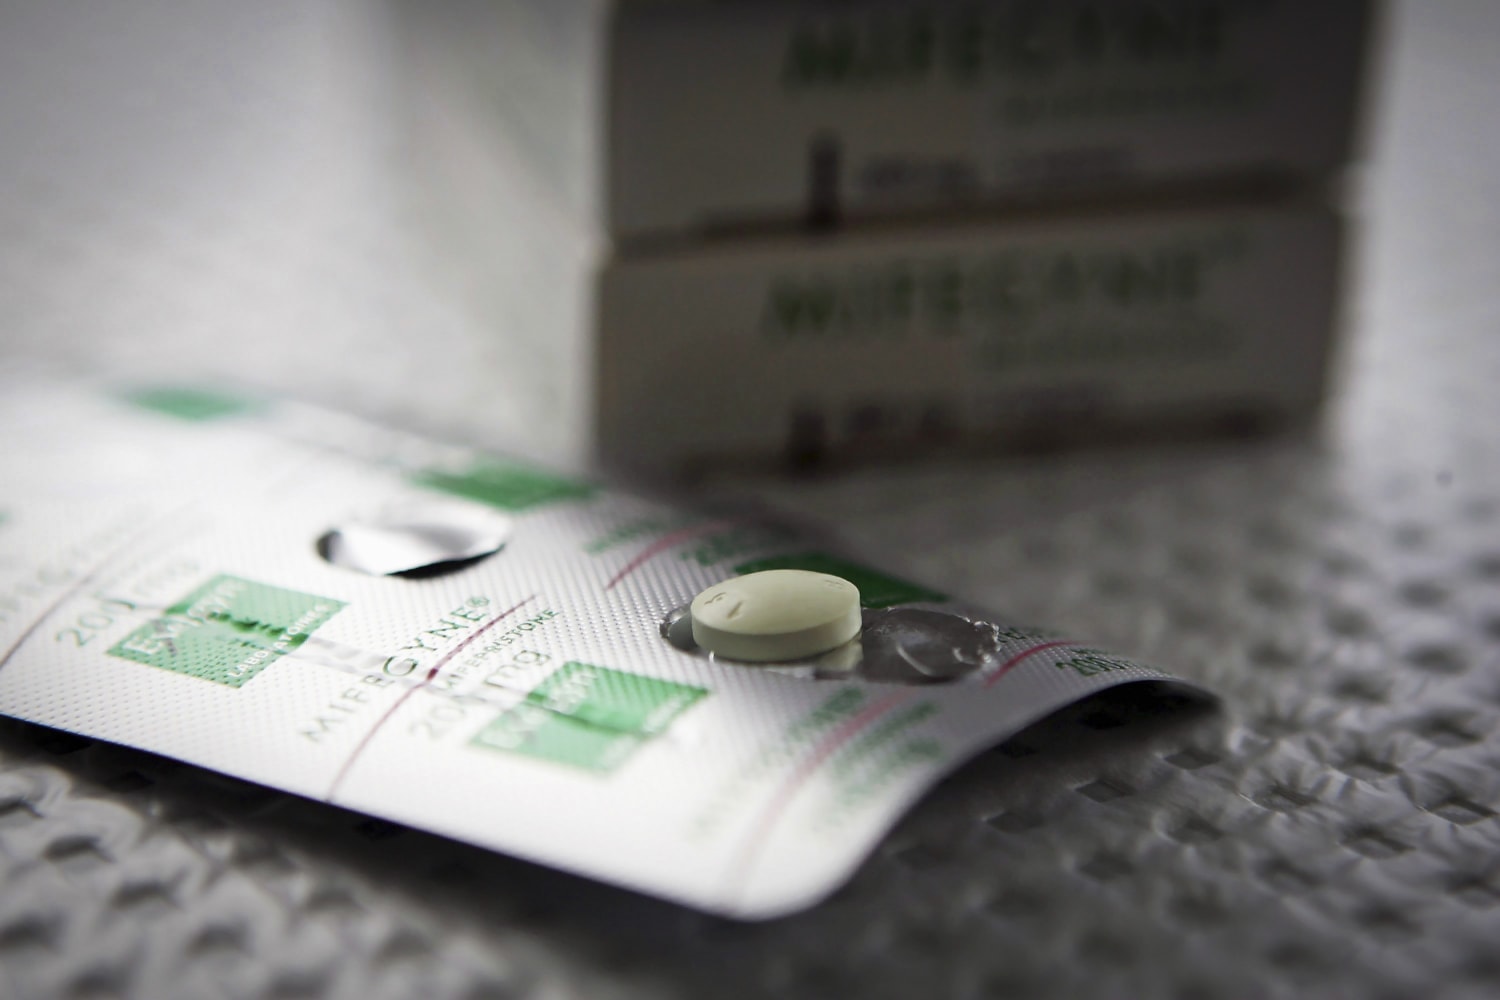 Supreme Court extends deadline on abortion pill ruling to Friday night